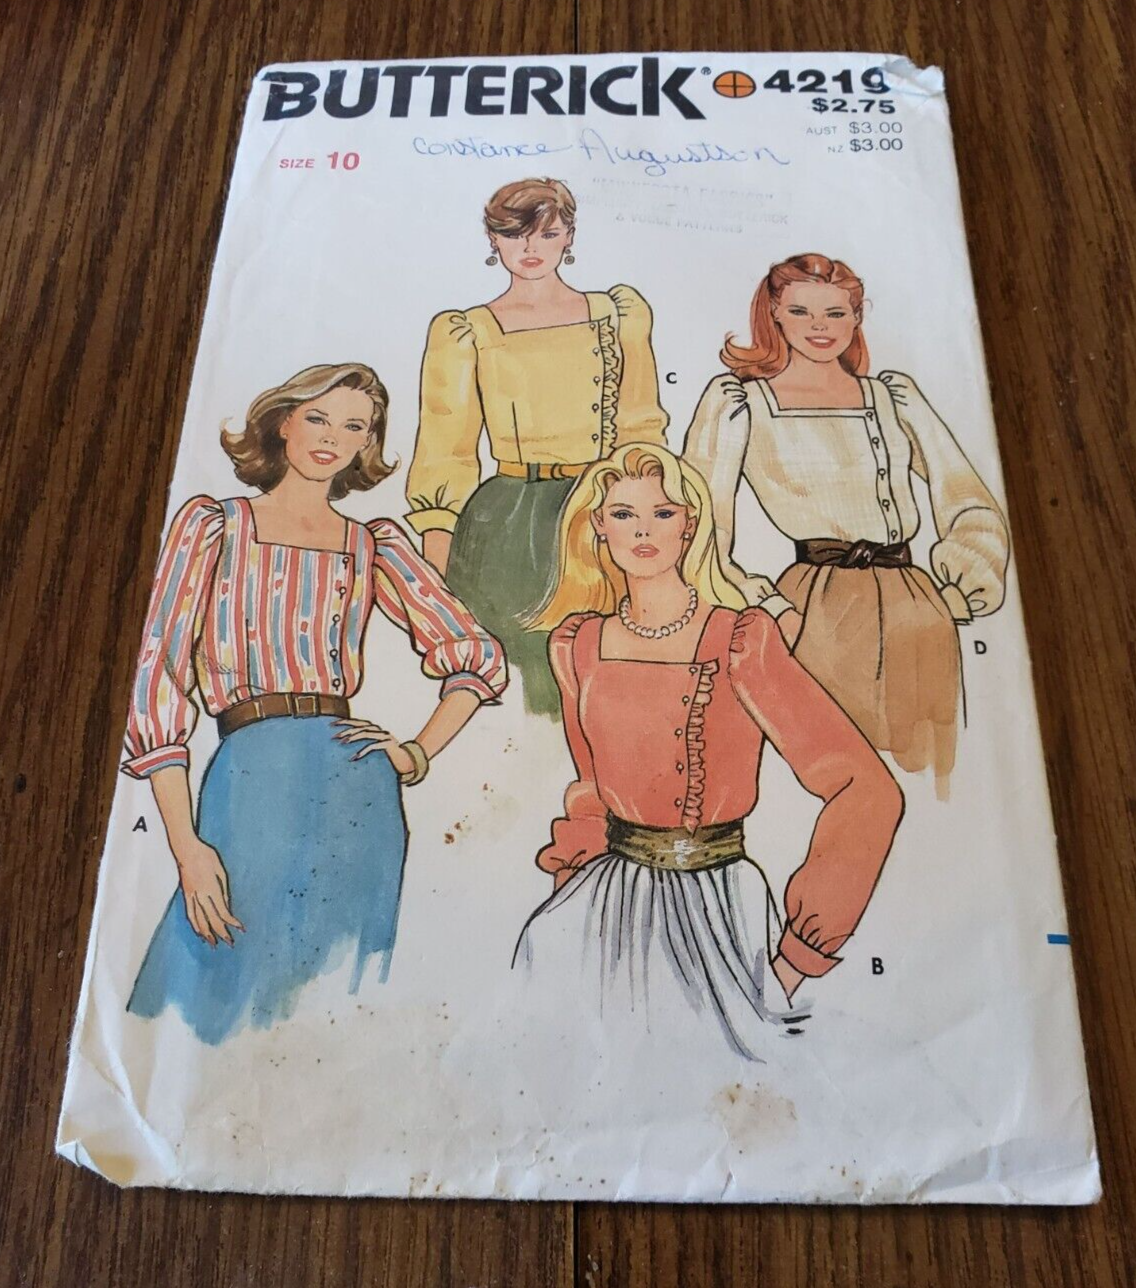 Primary image for Butterick 4219 Vintage size 10 Square Neck blouses